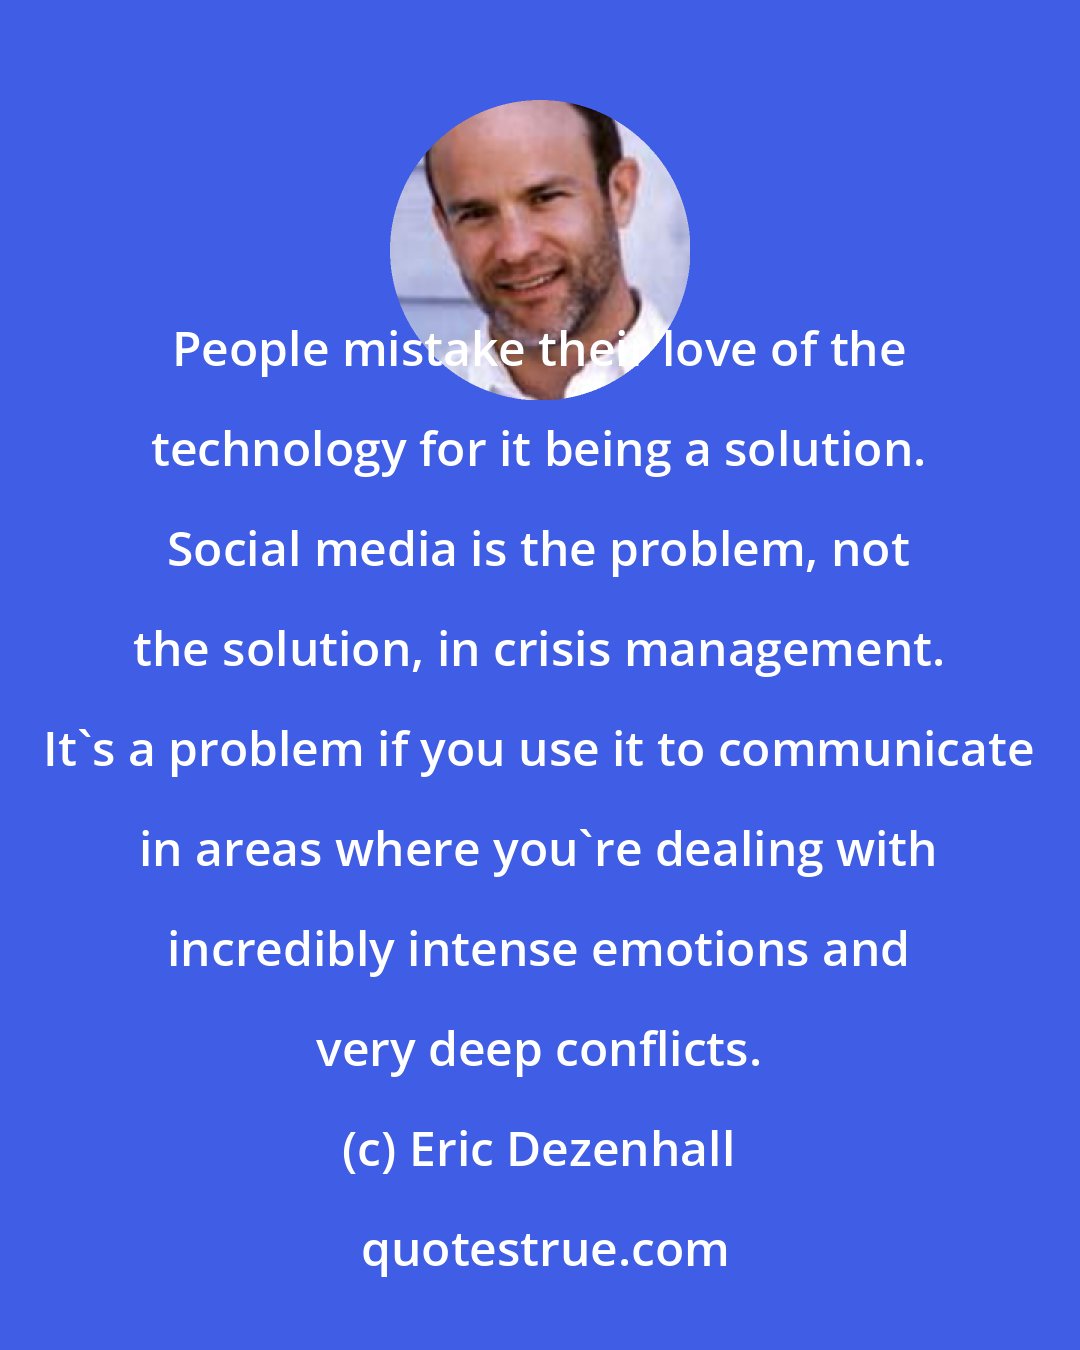 Eric Dezenhall: People mistake their love of the technology for it being a solution. Social media is the problem, not the solution, in crisis management. It's a problem if you use it to communicate in areas where you're dealing with incredibly intense emotions and very deep conflicts.